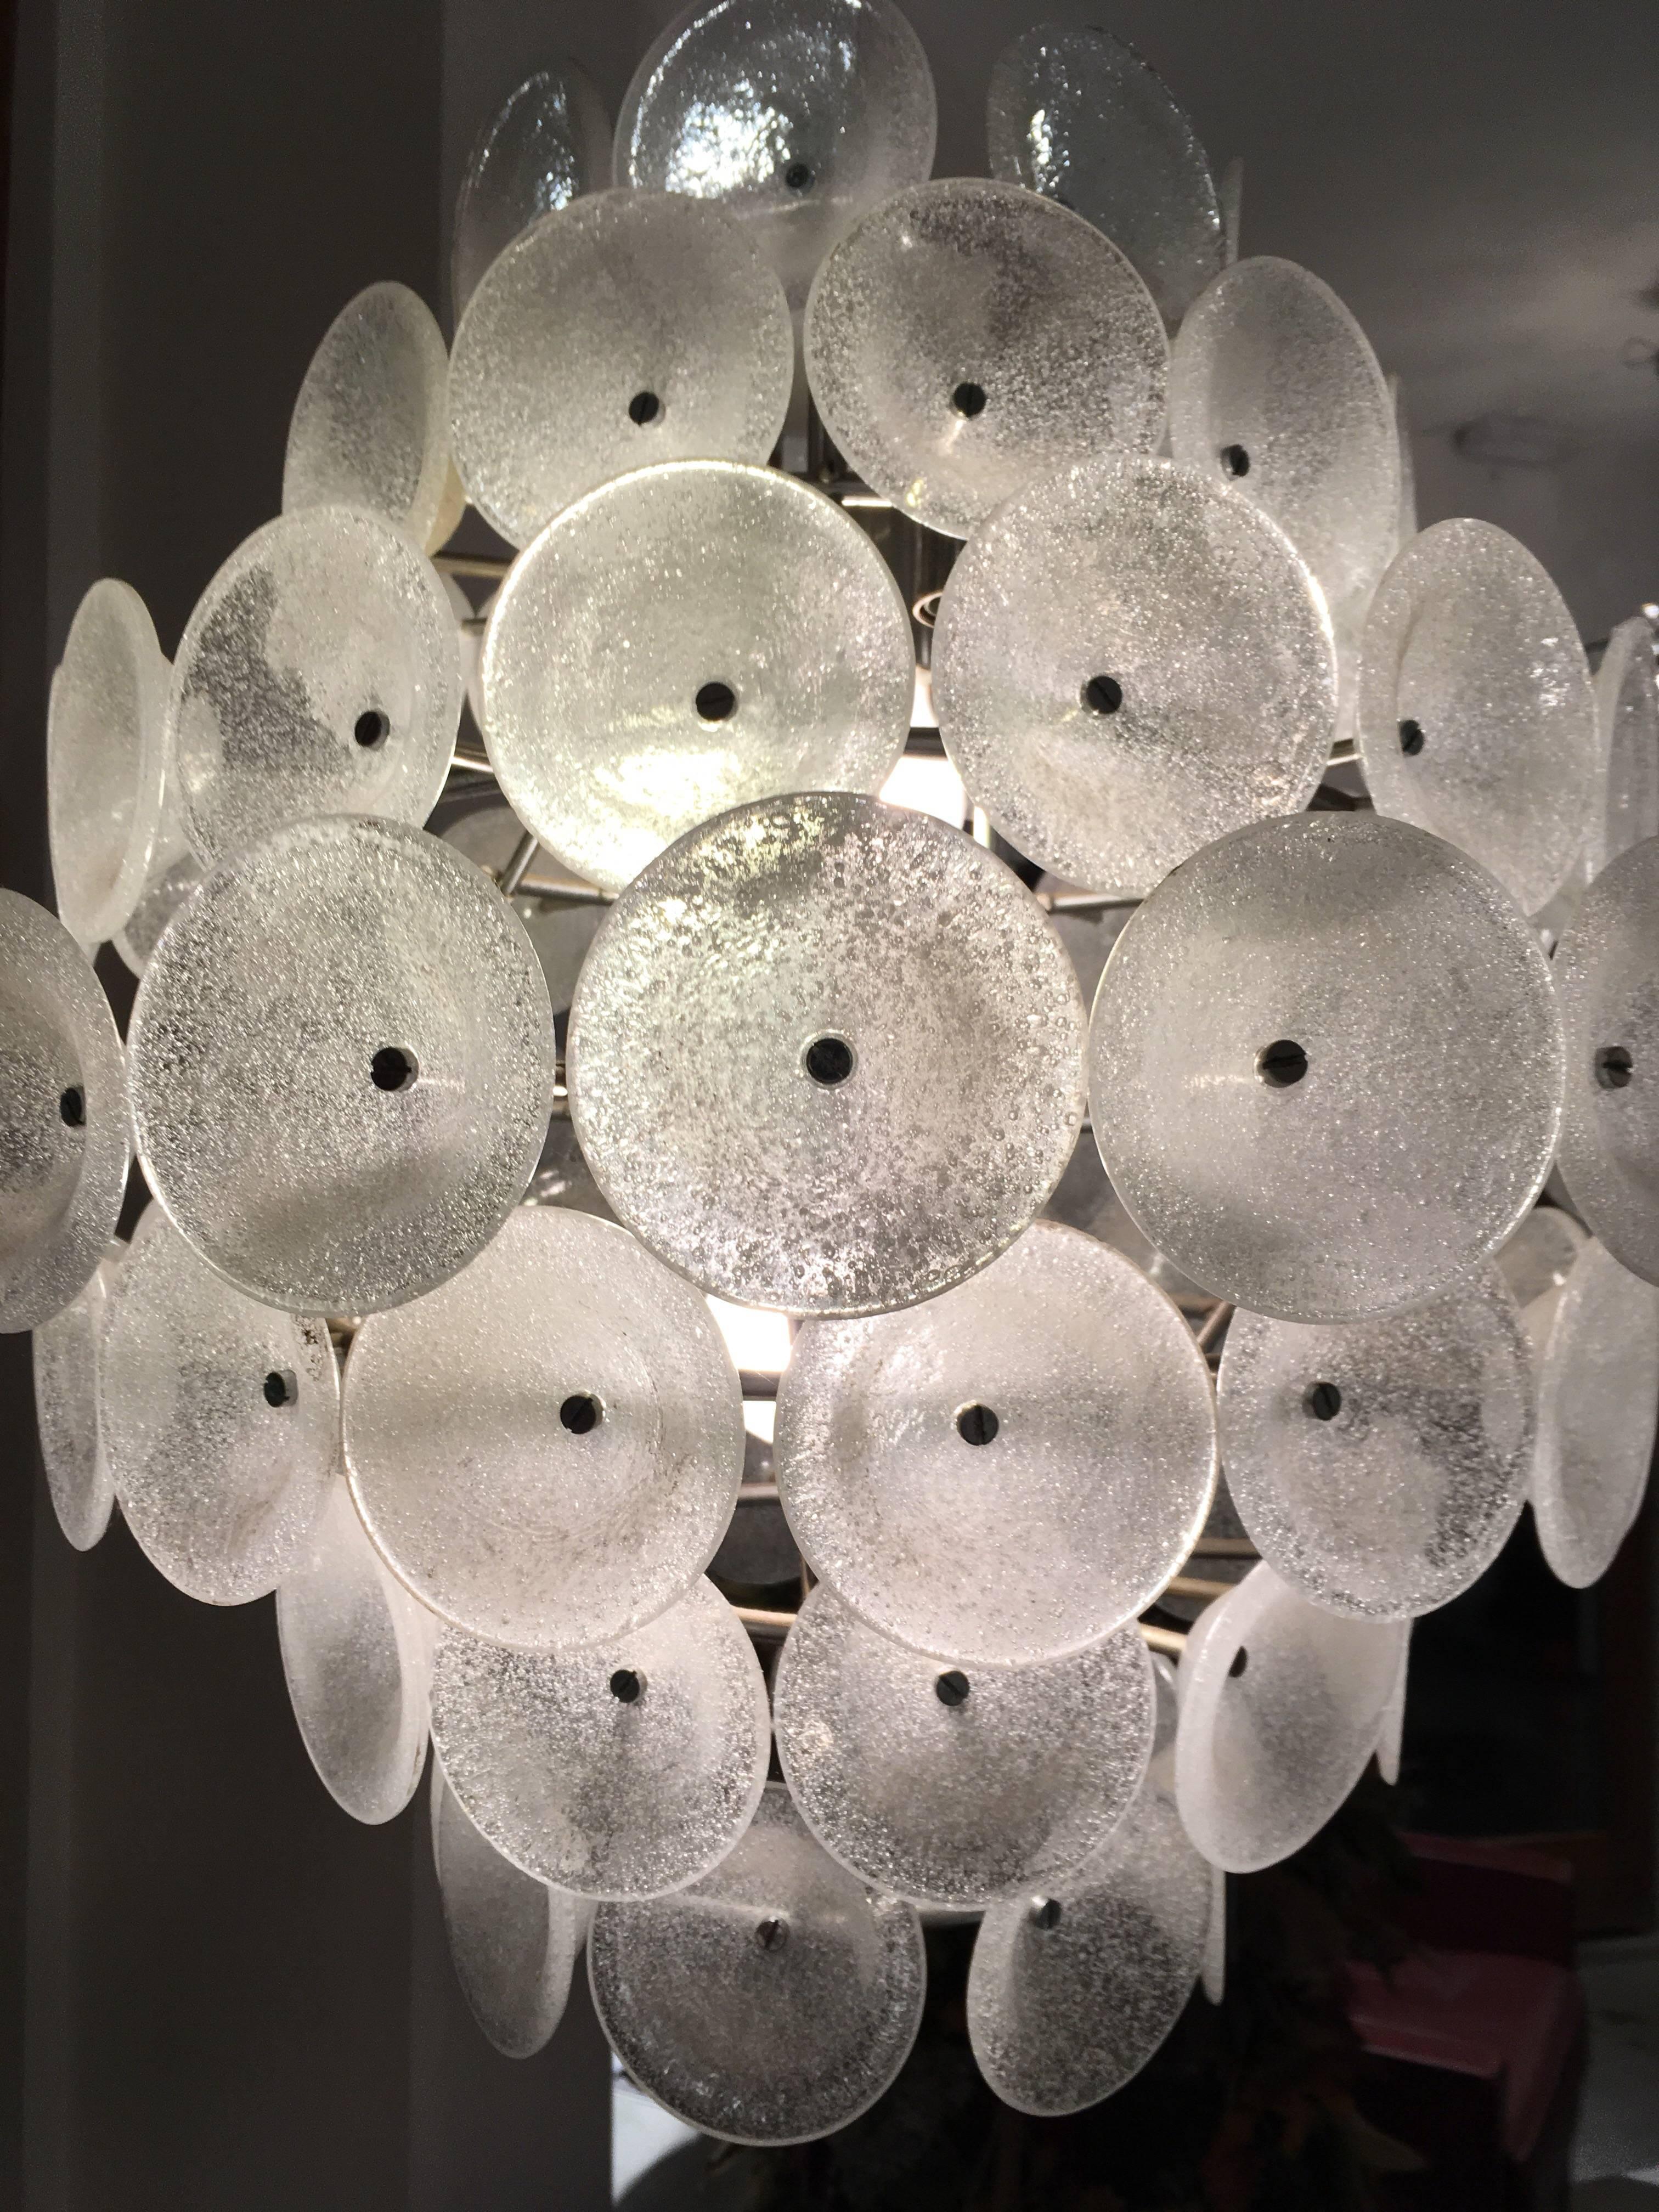 A Murano Chandelier with seven tiers of solid blown glass with air bubbles textured discs attached to a metal chrome base frame to make up this ultra-mod looking chandelier. 
Its compact size is a great look,great installed as a pendant in spaces